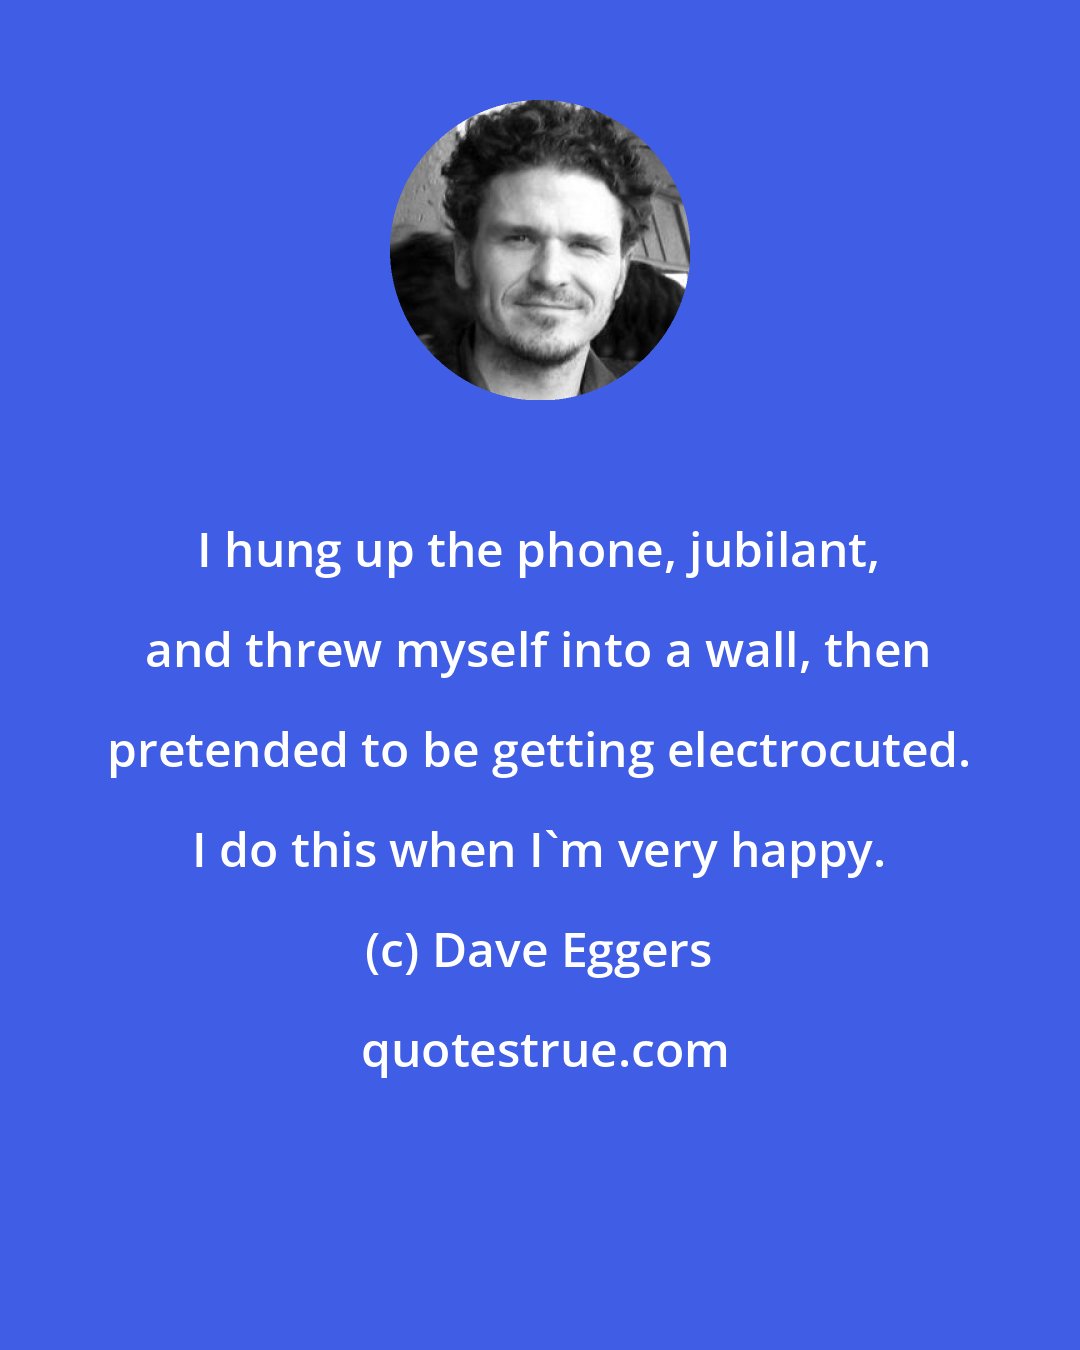 Dave Eggers: I hung up the phone, jubilant, and threw myself into a wall, then pretended to be getting electrocuted. I do this when I'm very happy.